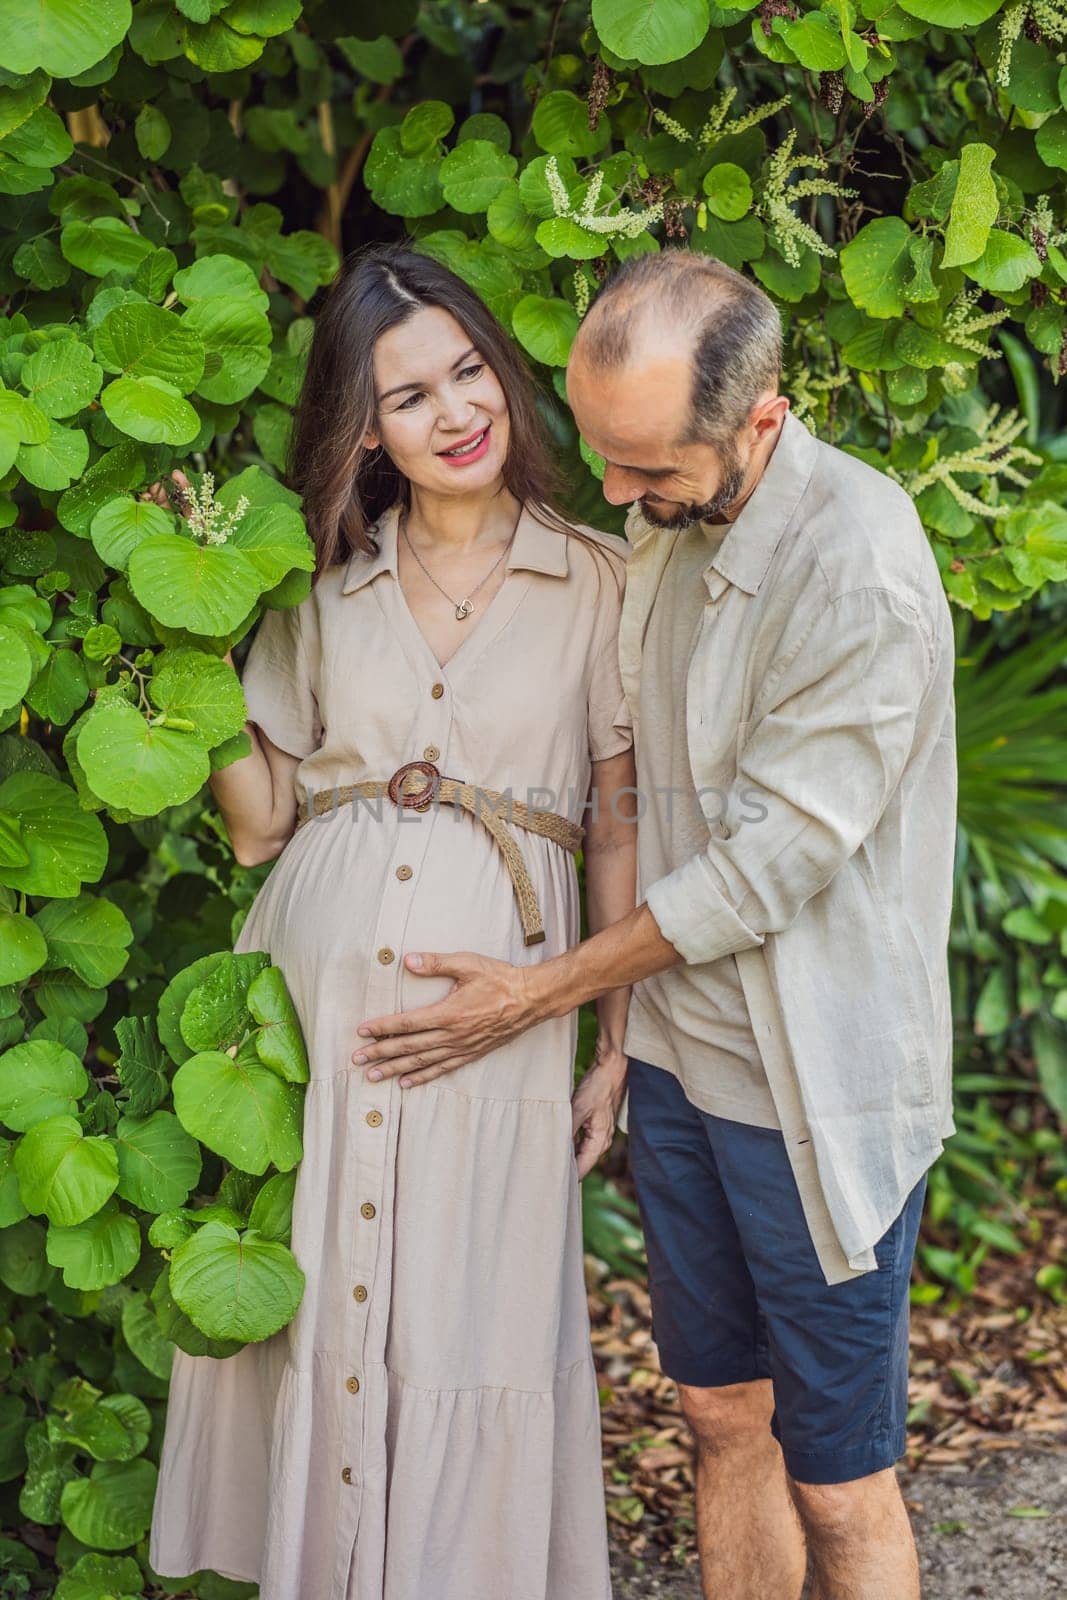 A blissful scene in the park as a radiant pregnant woman after 40 and her loving husband after 40, cherish the joy of parenthood together, surrounded by nature's serenity.